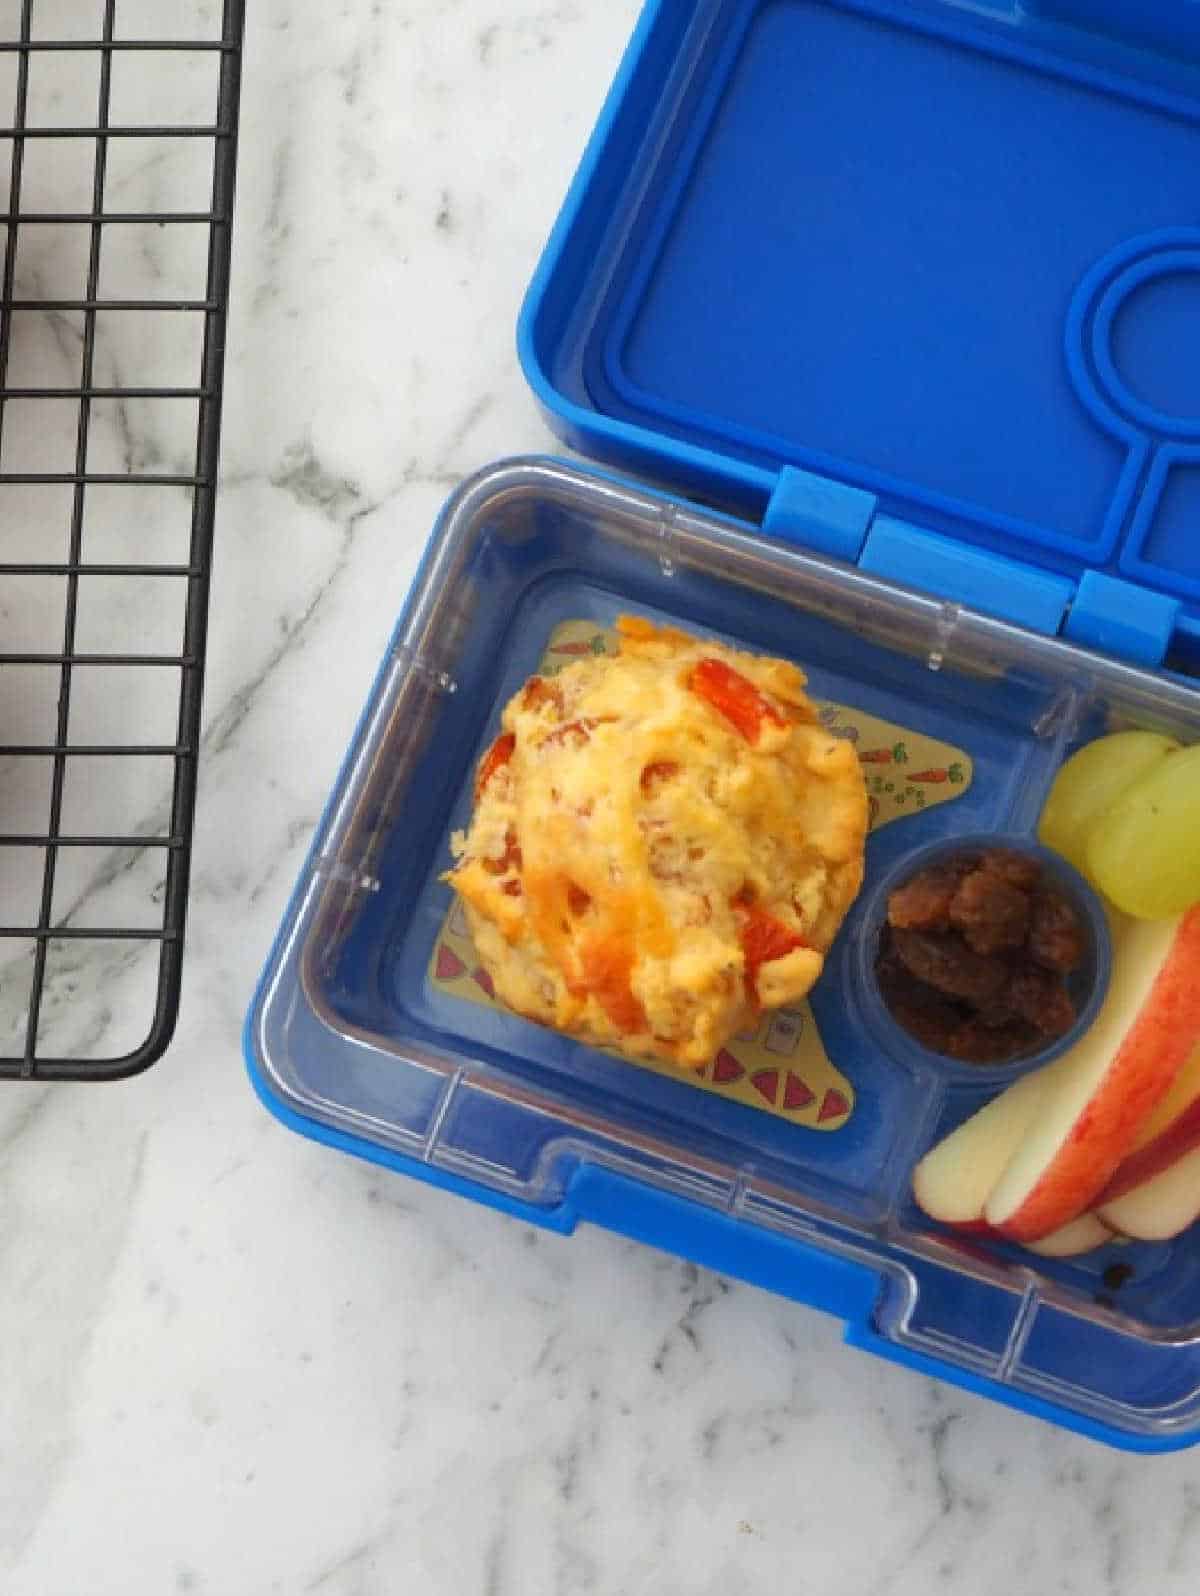 Ham and cheese muffin in a blue yumbox